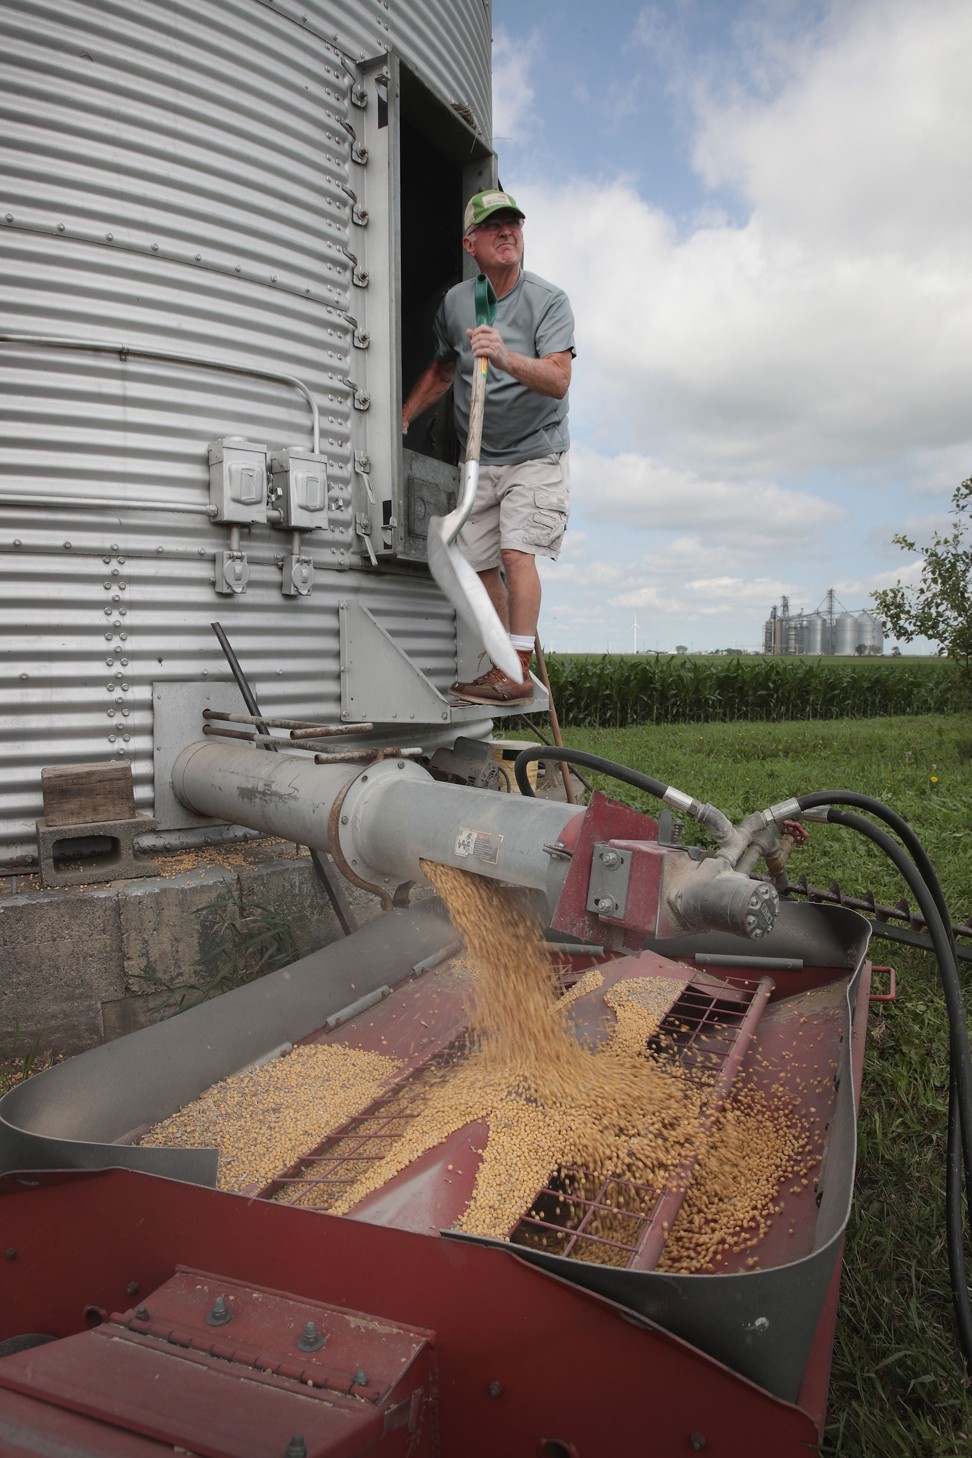 Farmer John Duffy loads soybeans from his grain bin onto a truck in June 2018 in Dwight, Illinois. Chinese retaliatory tariffs targeted the US agricultural industry, restricting US farmers’ access to their top soybean market. Photo: Getty Images/AFP